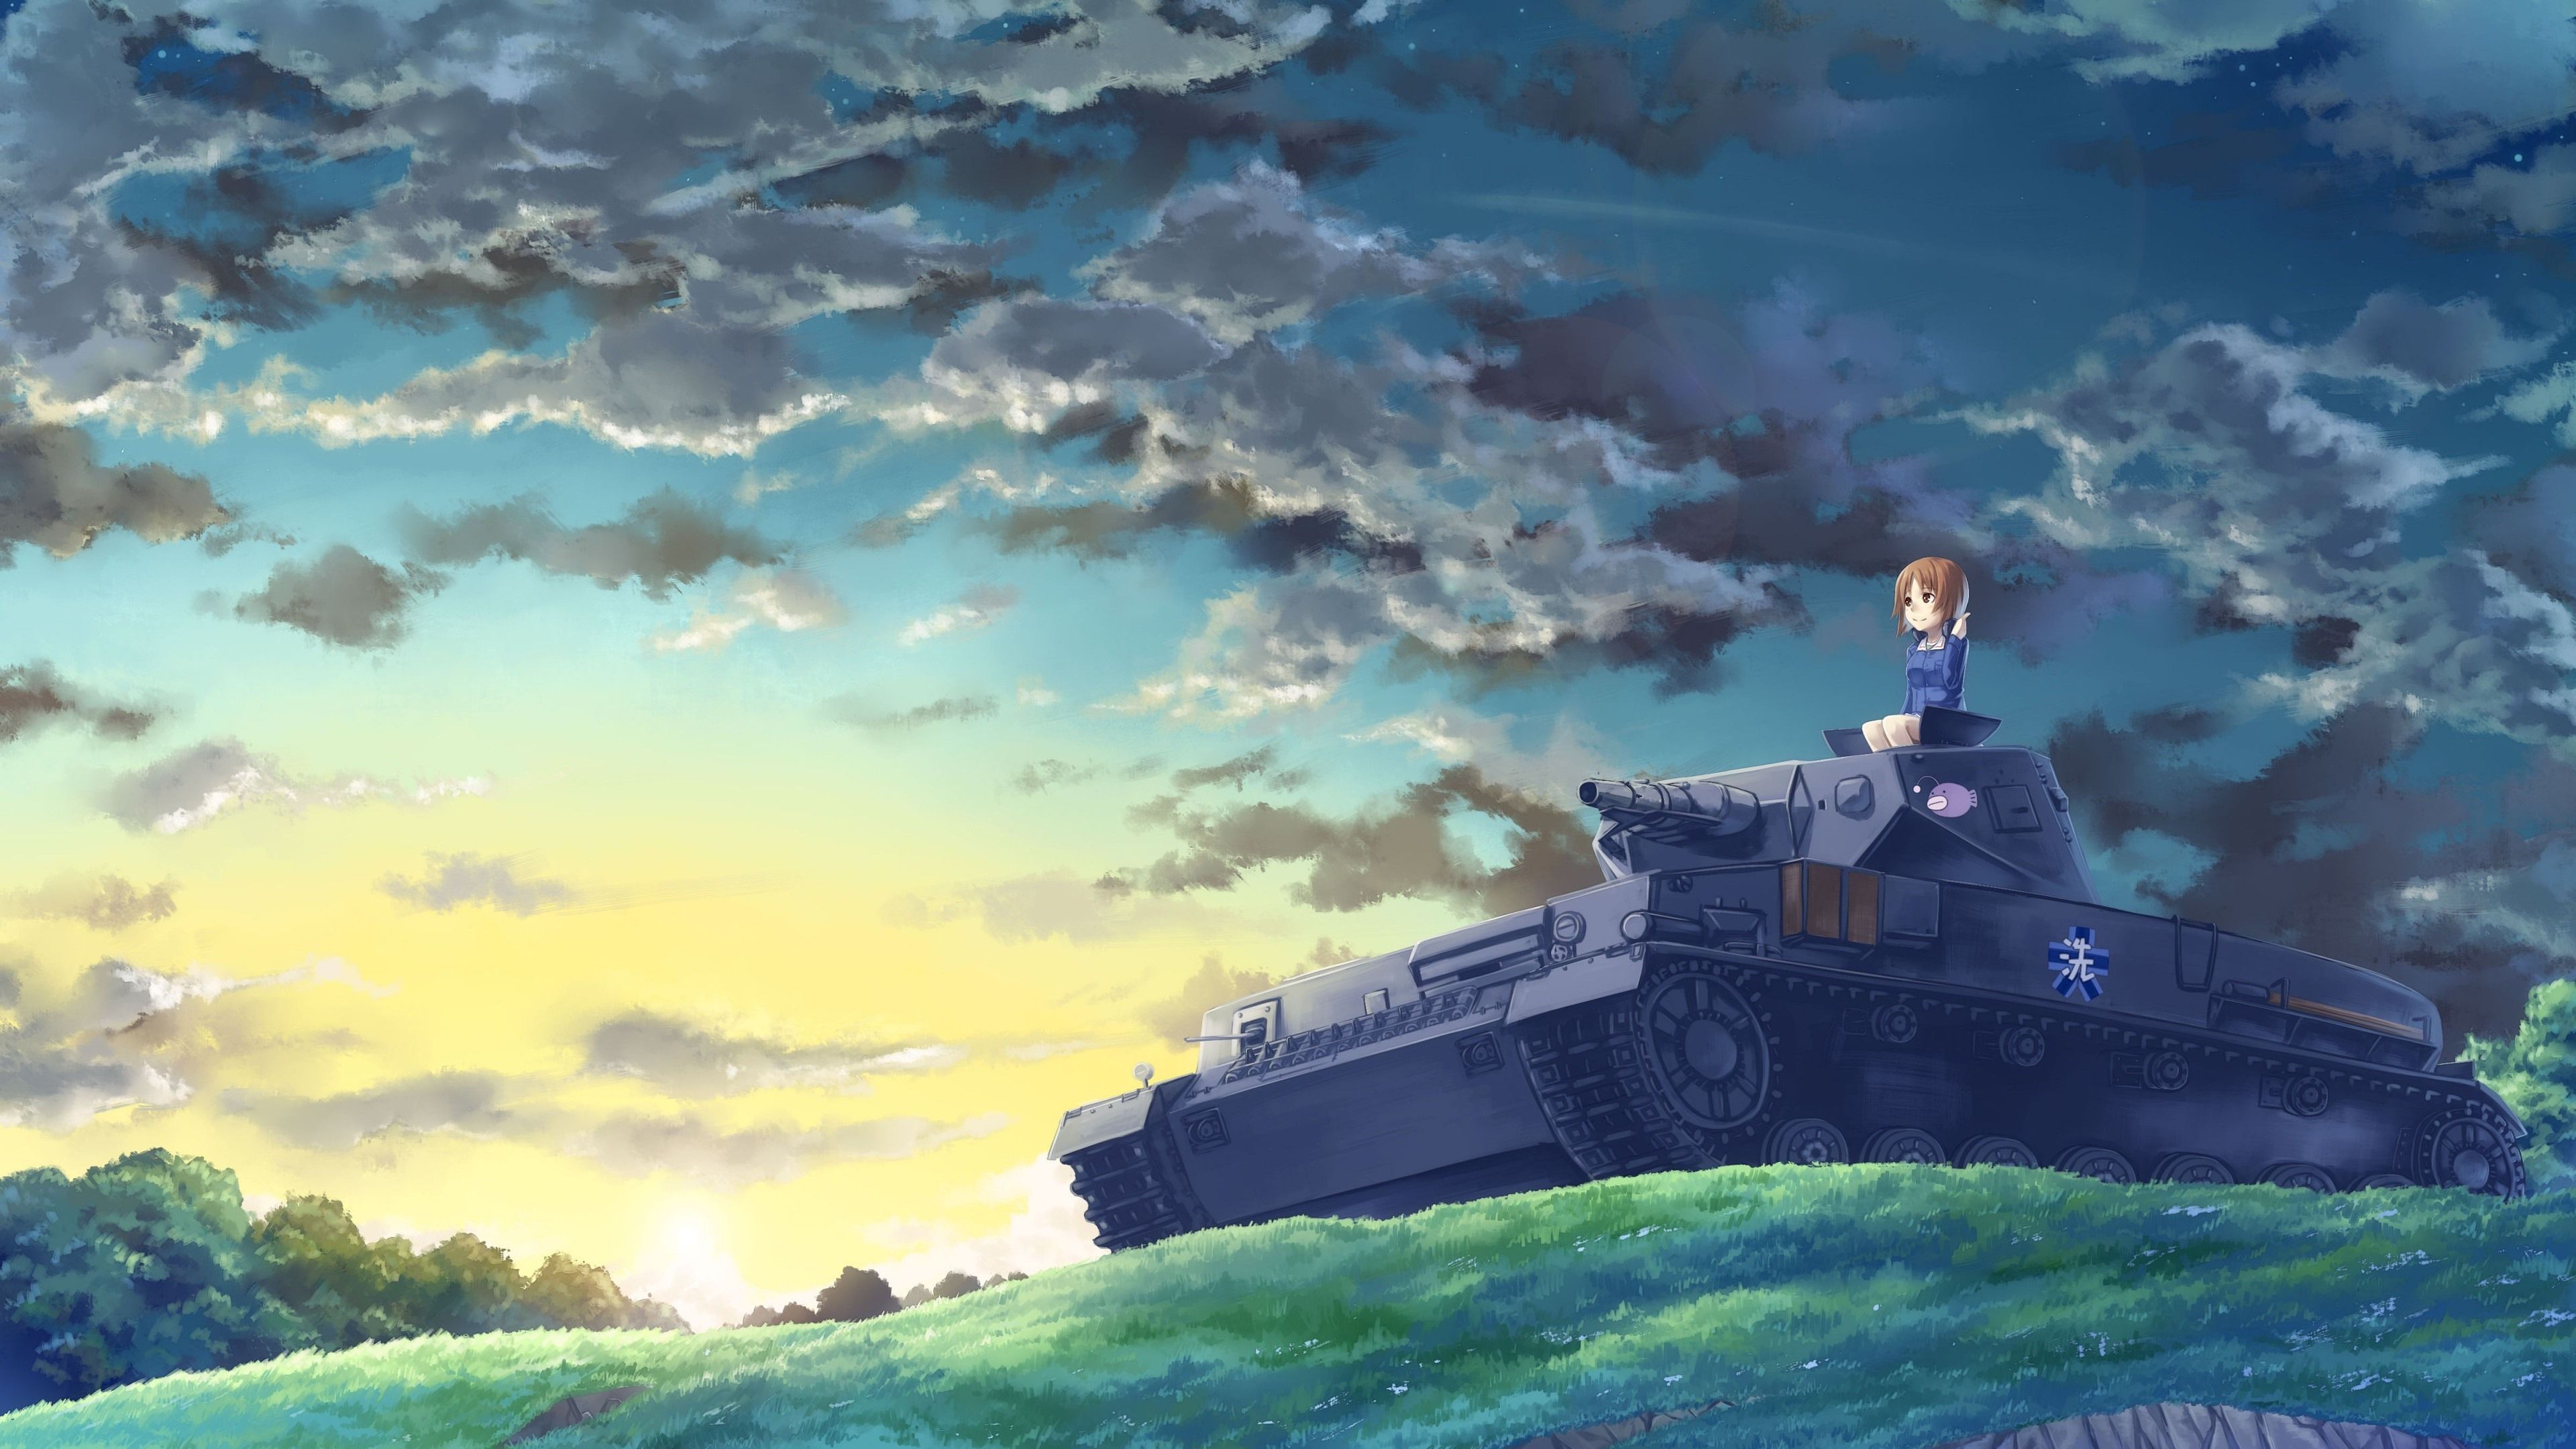 Wallpaper Anime girl and tank, clouds 3840x2160 UHD 4K Picture, Image